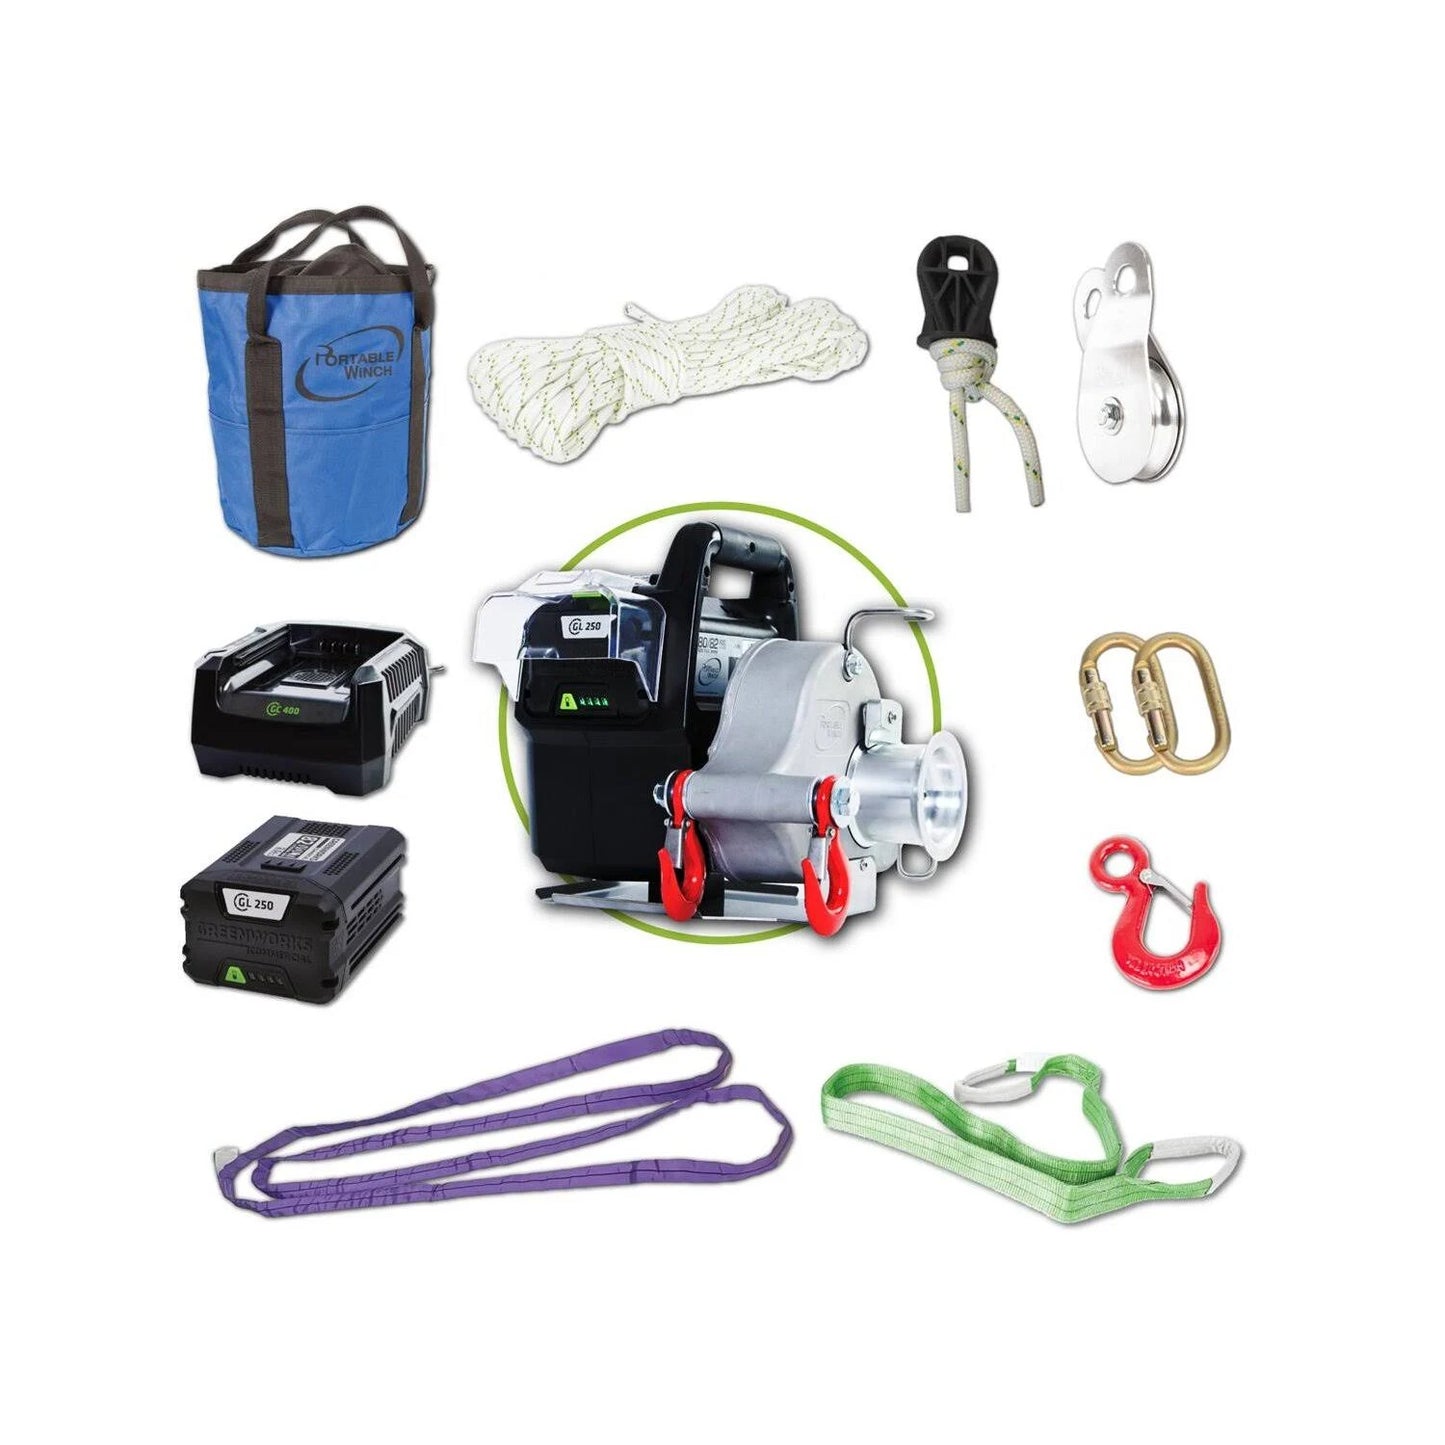 Portable Winch PCW3000-LI-AW Battery Pulling Winch With Accessories